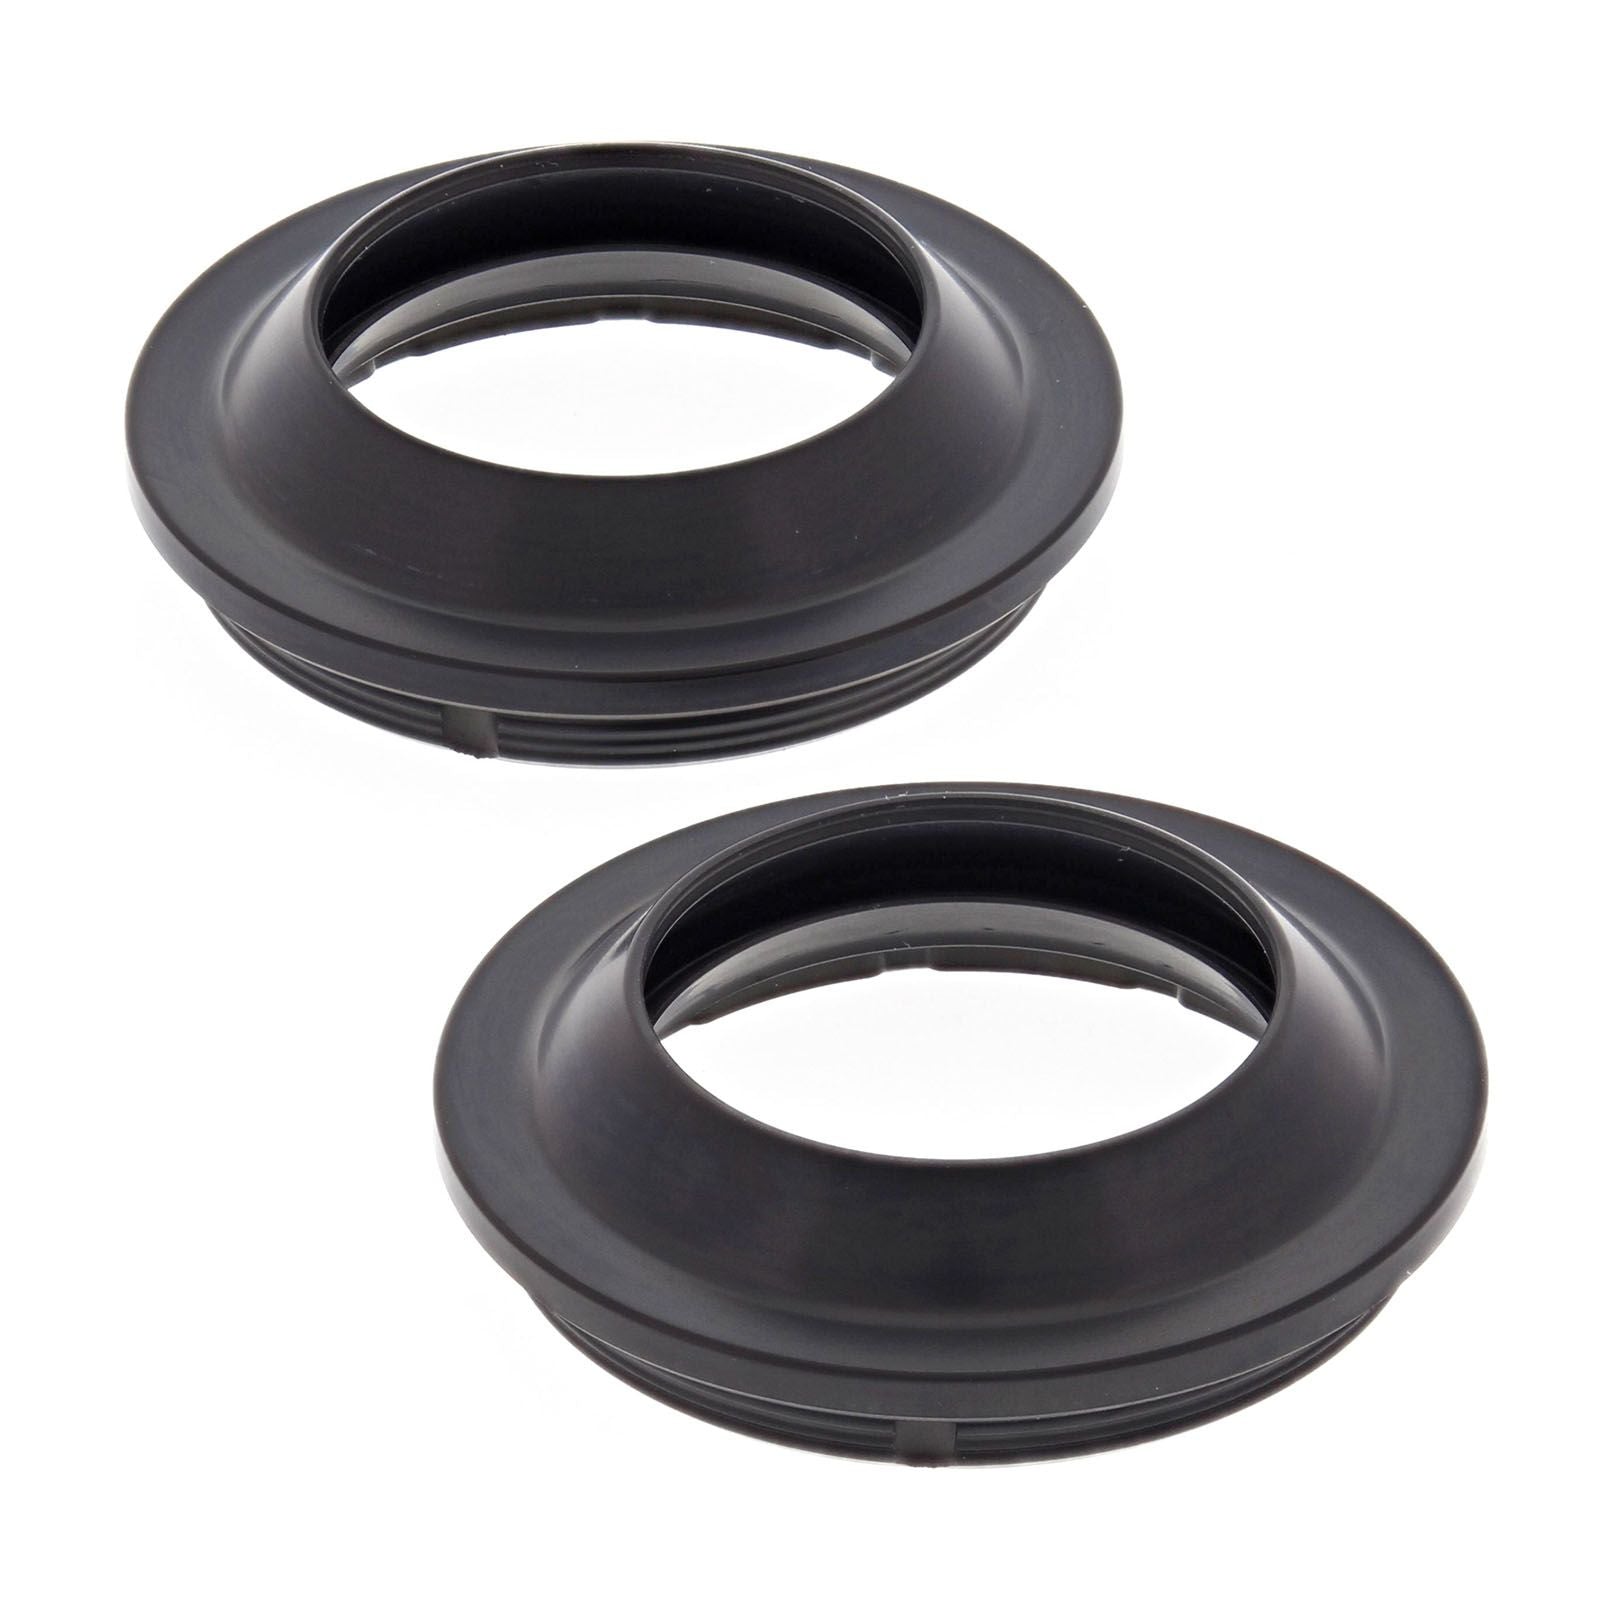 New ALL BALLS Racing Fork Dust Seals 33X46 #AB57113